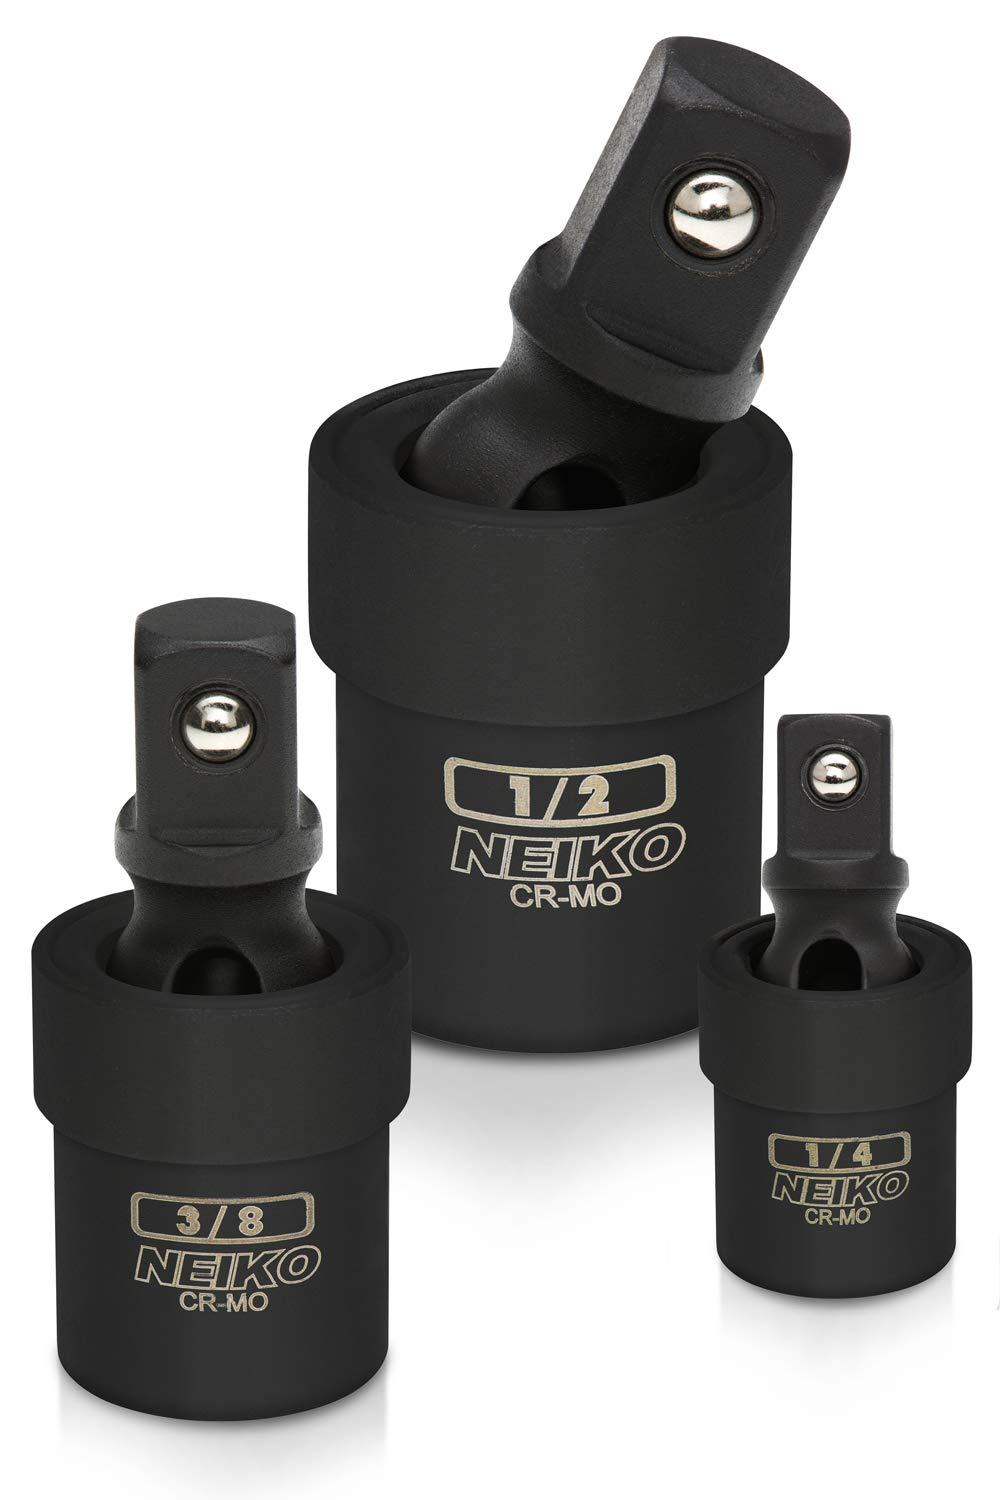 NEIKO 02486A Impact Universal Joint-Socket Swivel Set, Socket Extension Set Made From cr-Mo with Included 14-, 38-, and 12-Inch 